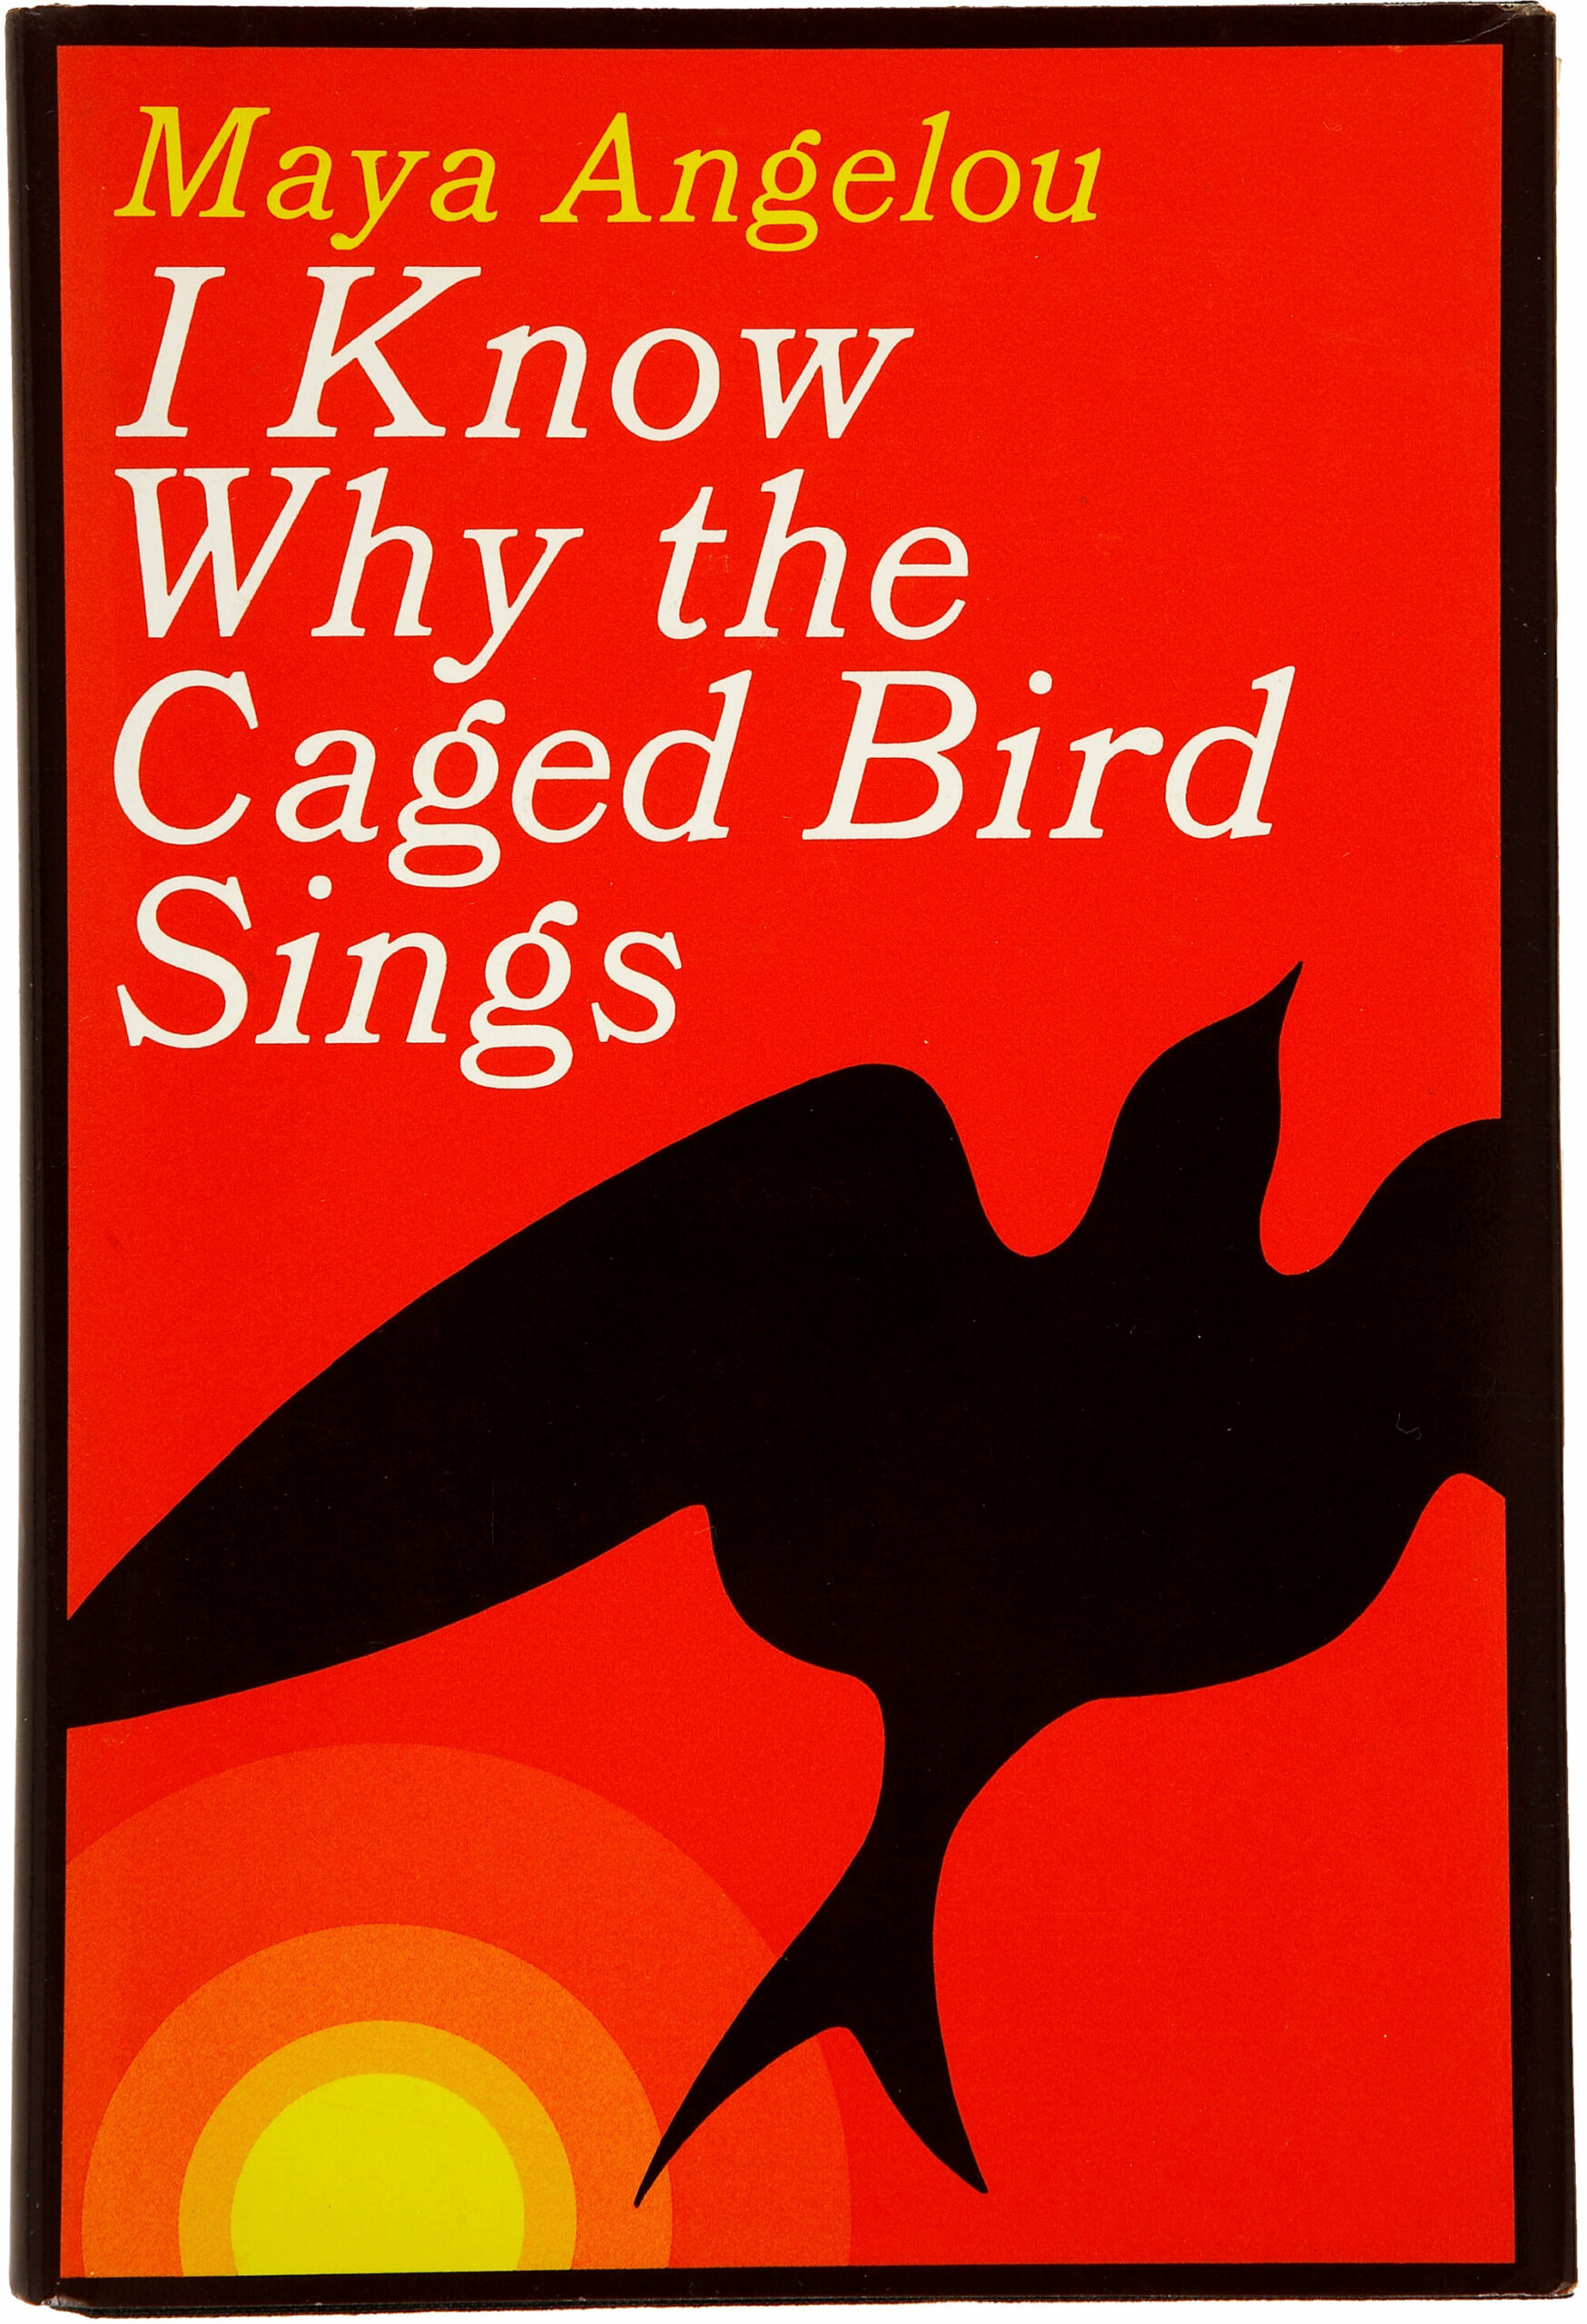 I Know Why the Caged Bird Sings Theme